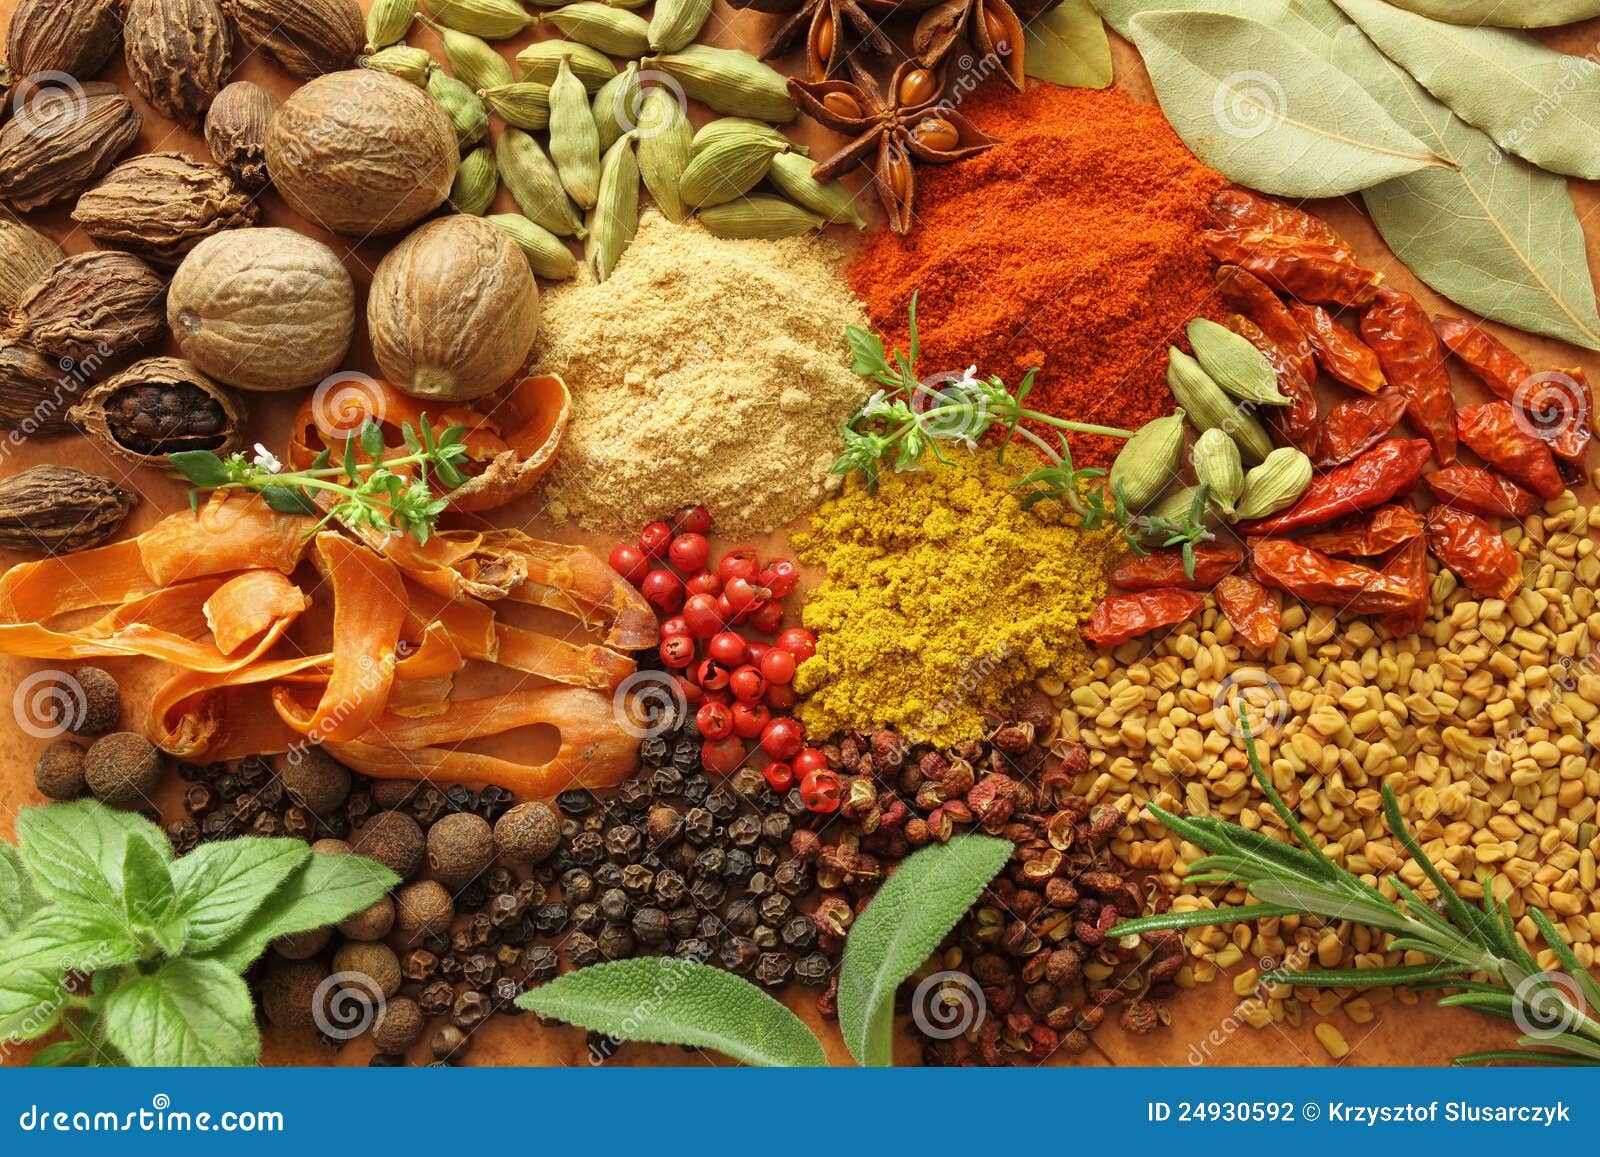 Spices And Herbs Sto